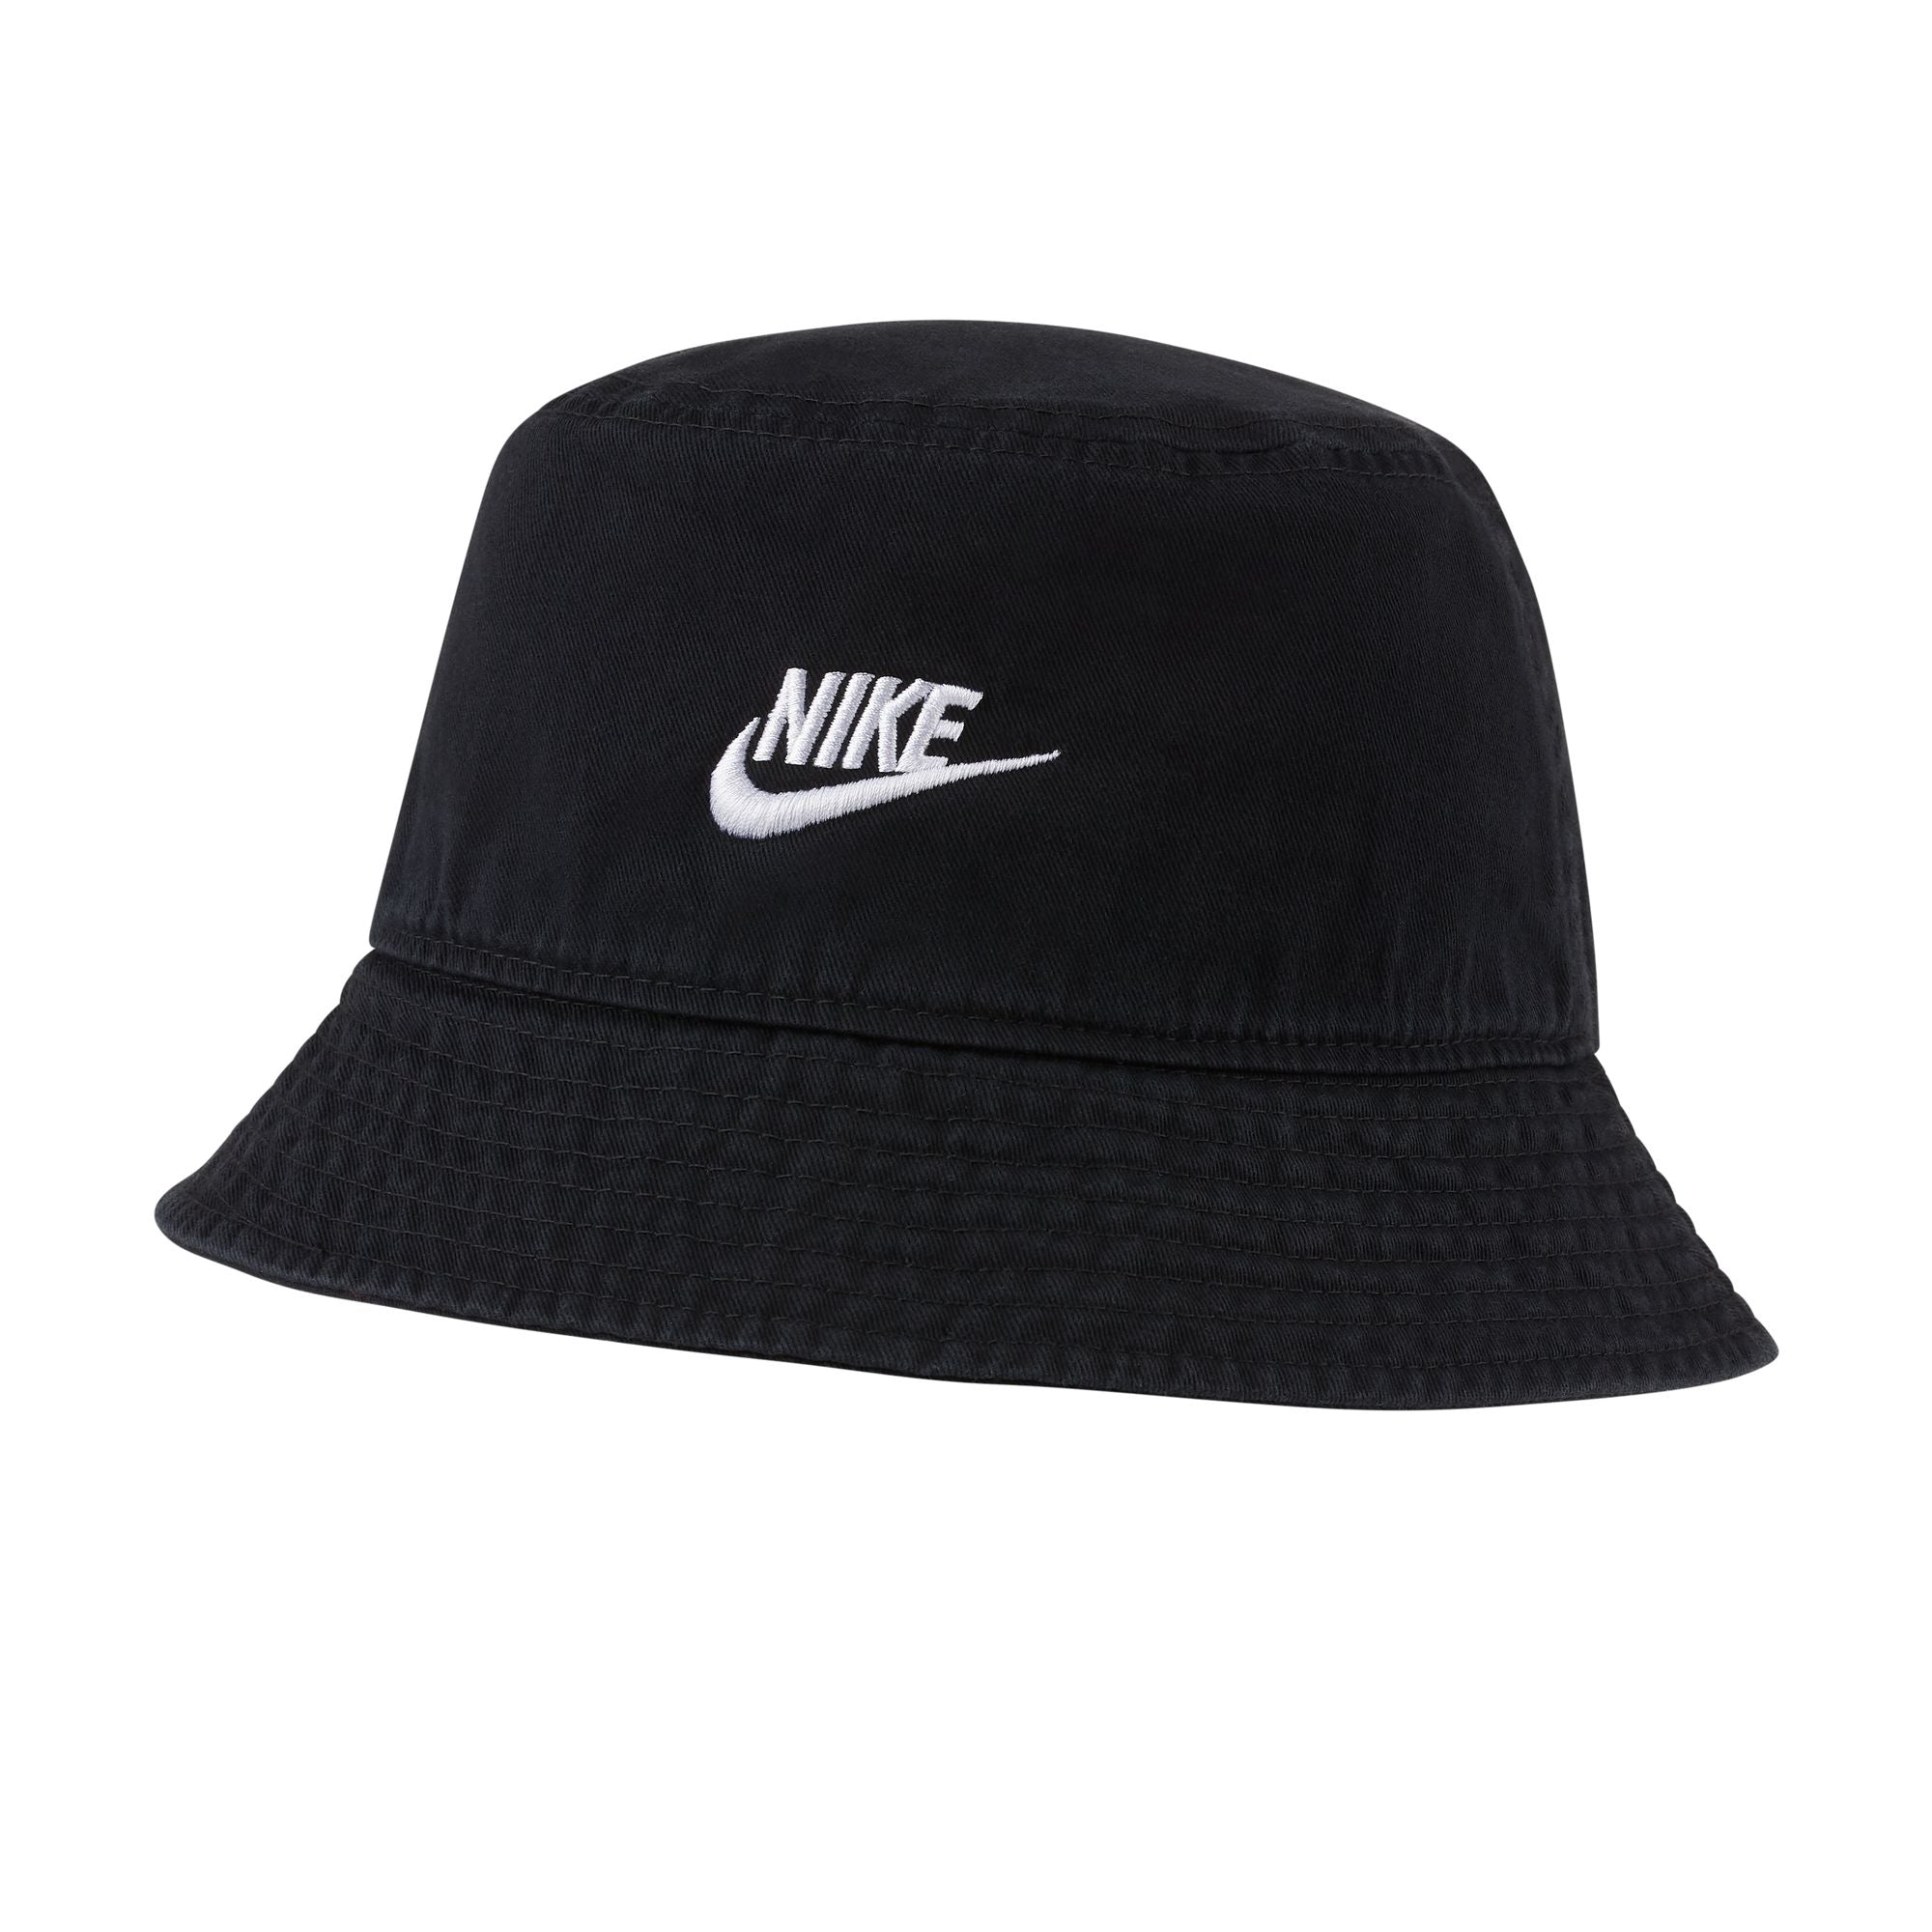 Shop Nike's Best: Shoes, Apparel & Accessories at atmos.ph – atmos ...